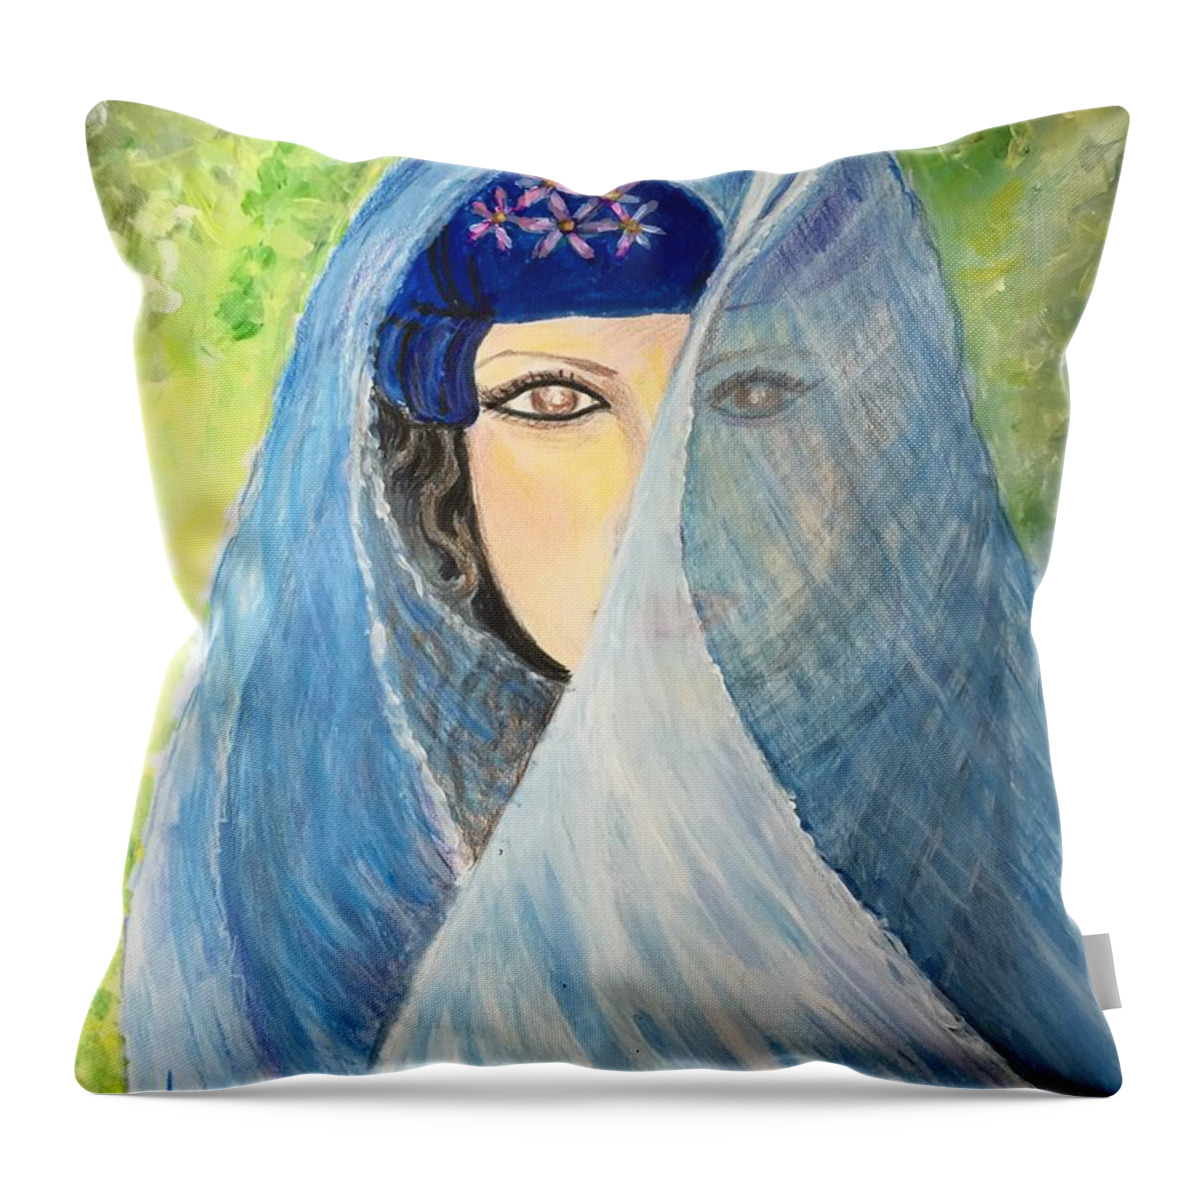 Mystical Throw Pillow featuring the painting The Seer by Ronnie Egerton